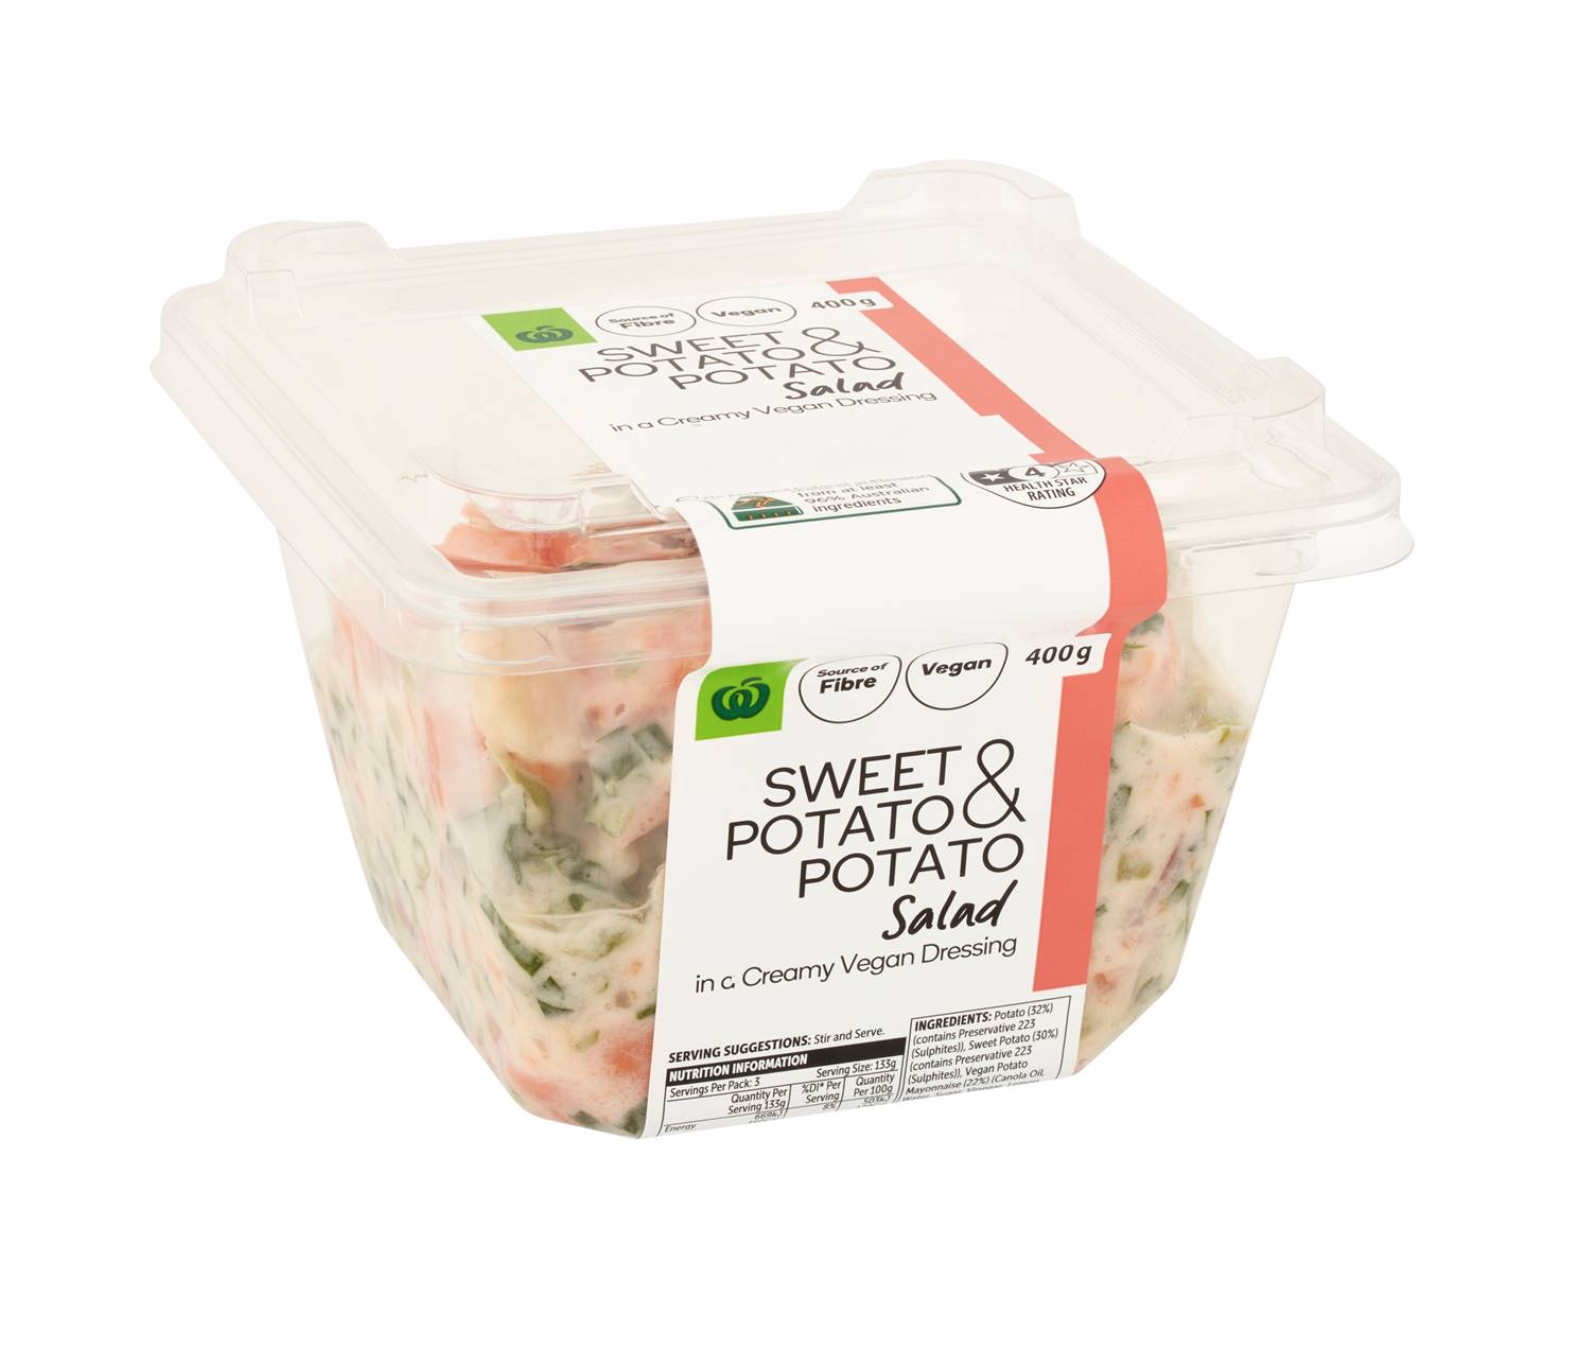 A photo of a pre-made vegan potato salad that's available at Woolworths.